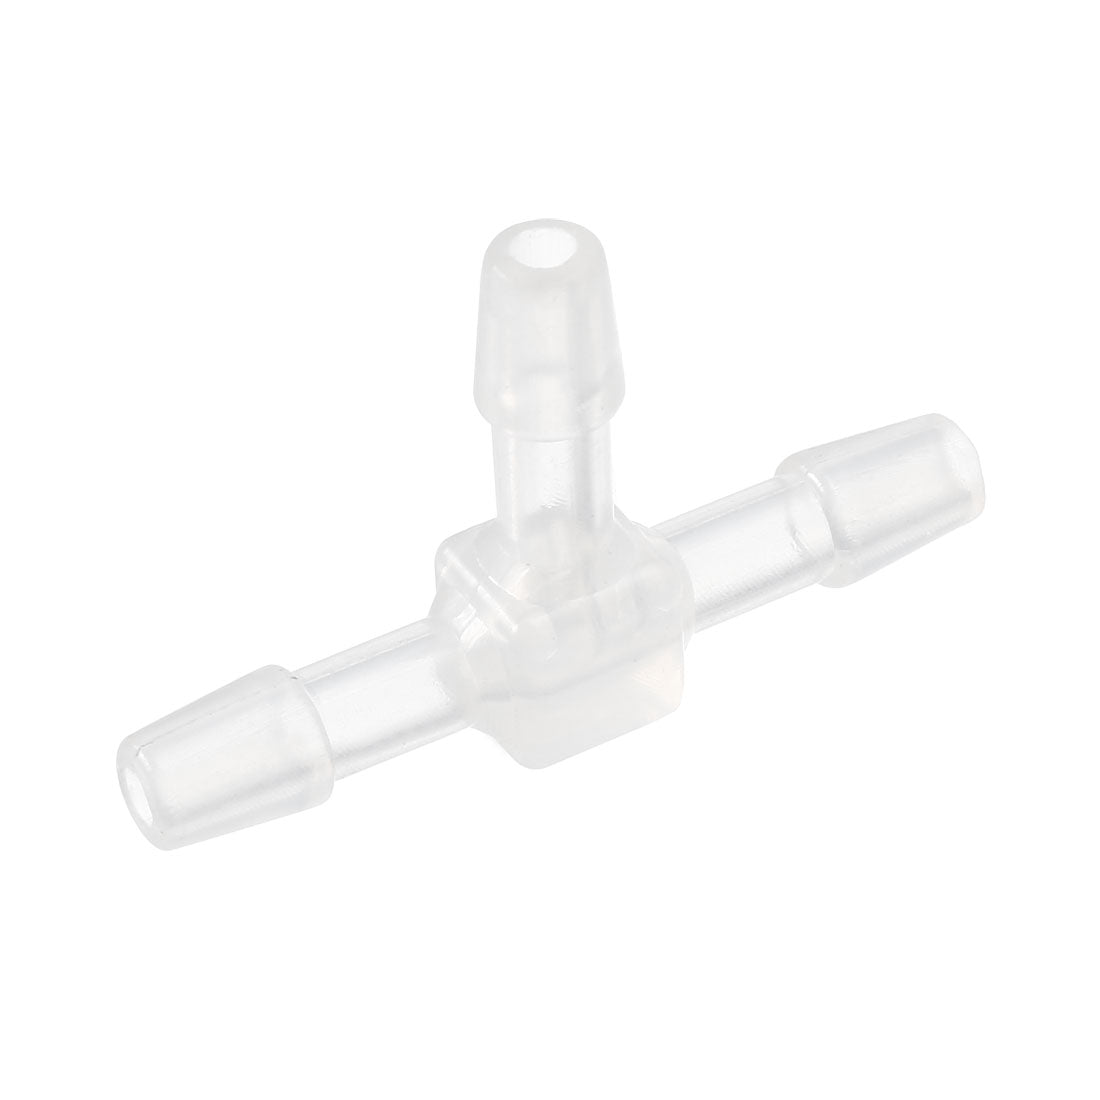 uxcell Uxcell 3-Way T Shape Air Valve Connector Plastic Inline Tubing Connectors for 4mm Airline Tube